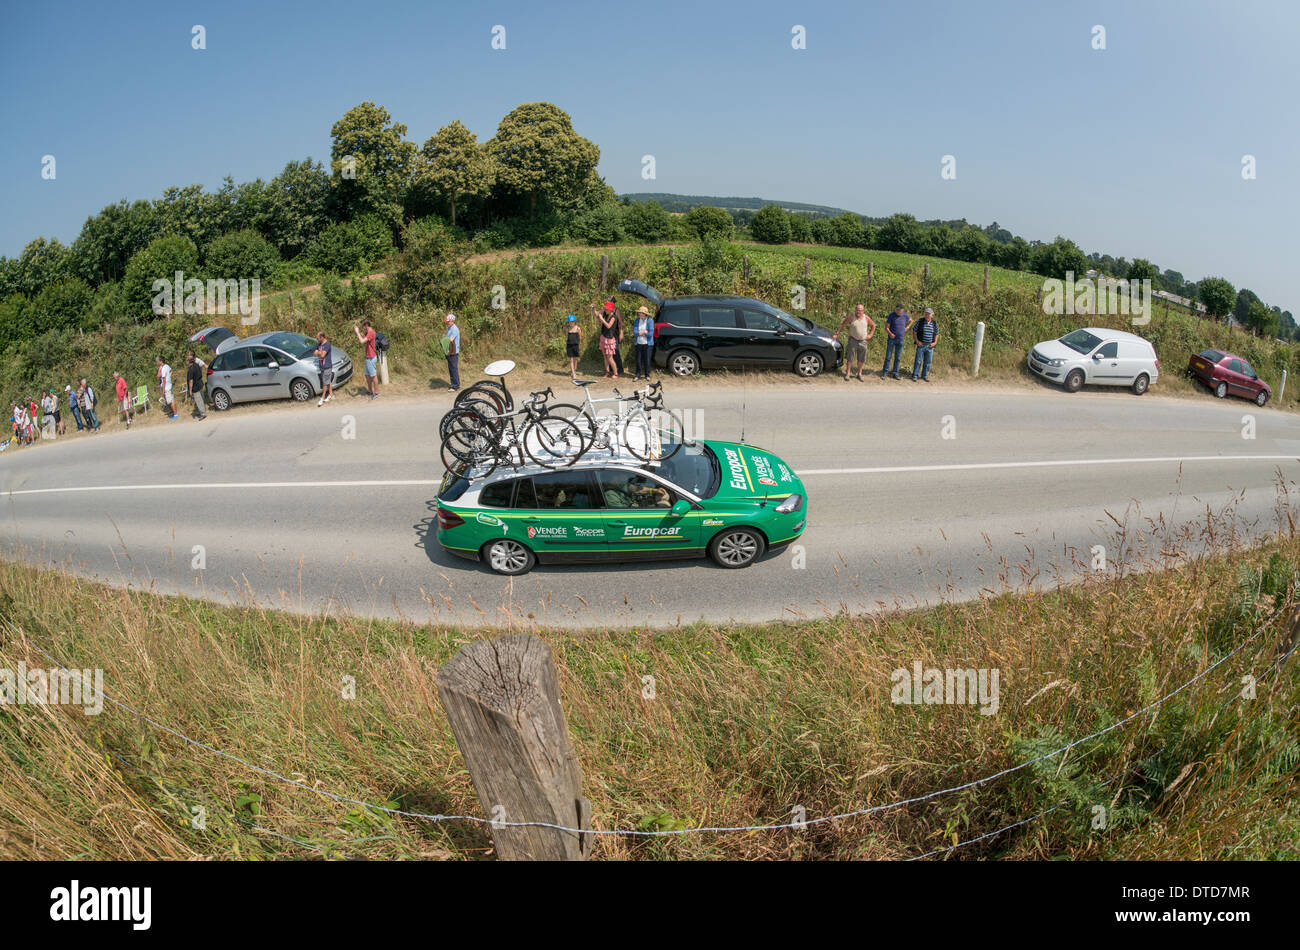 Europcar team car on Stage 12 of the 2013 Tour de France. This was Stage 12 and was 218km long. Stock Photo